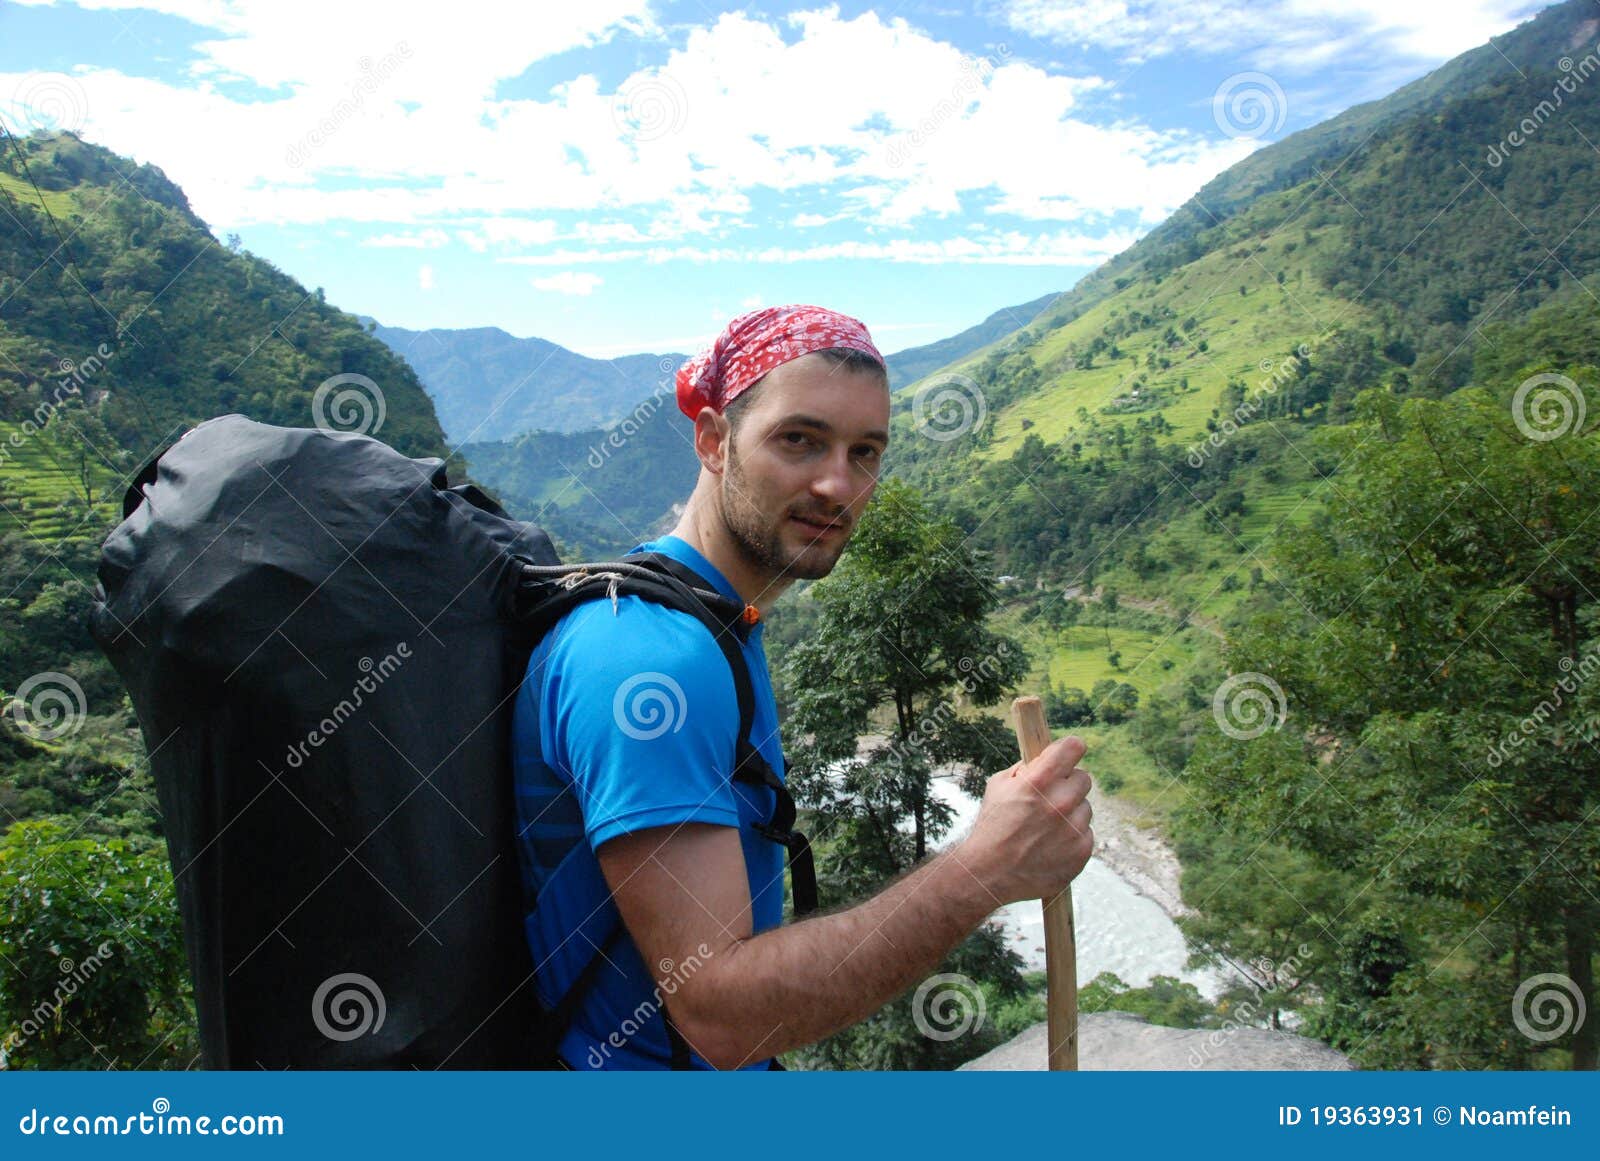 backpacker in the outdoors